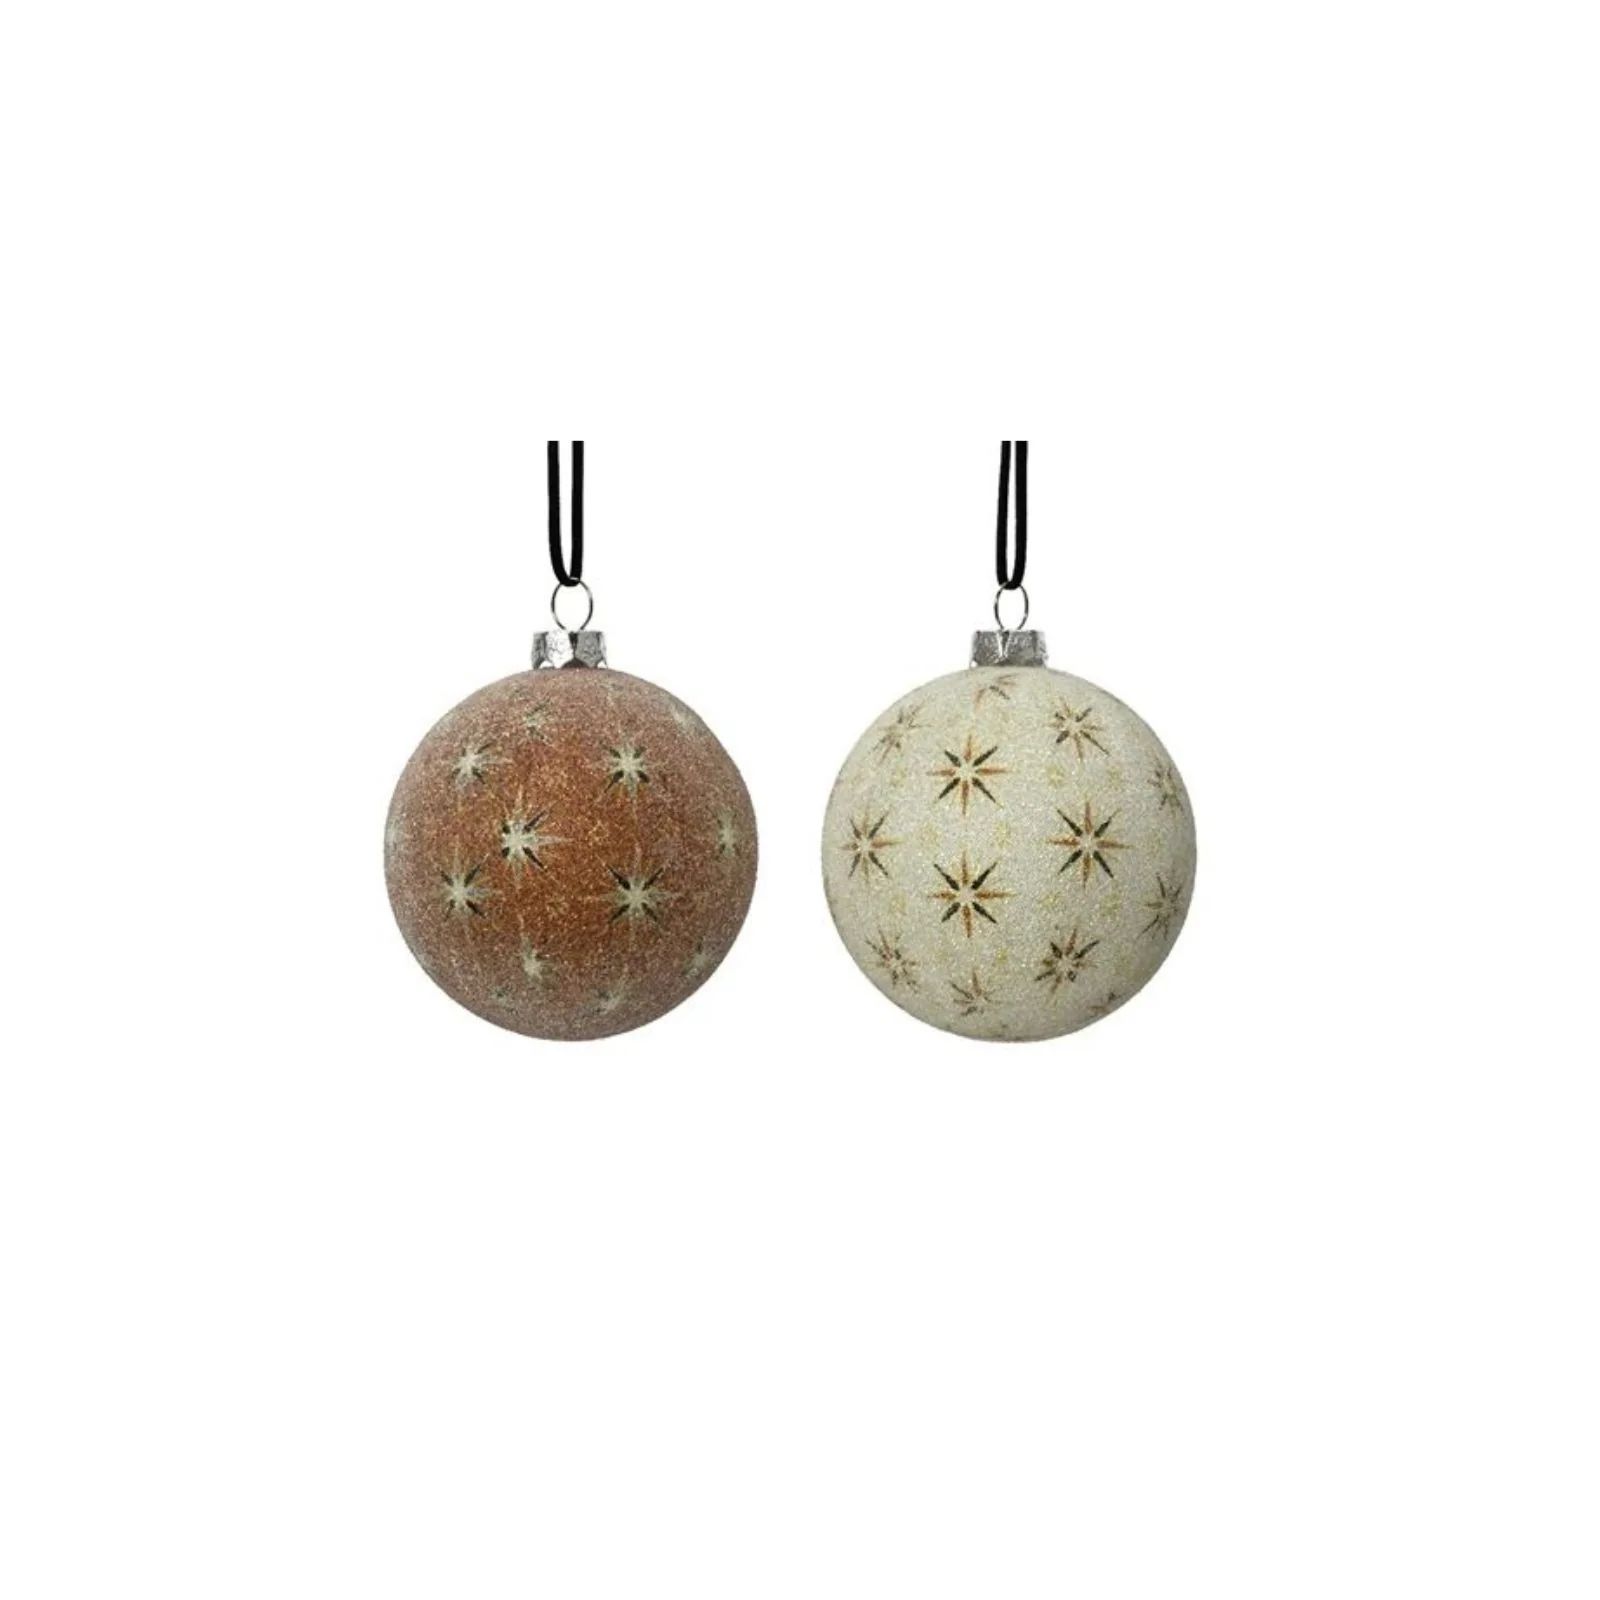 Neutral Beaded Star Ornament Set | Brooke and Lou